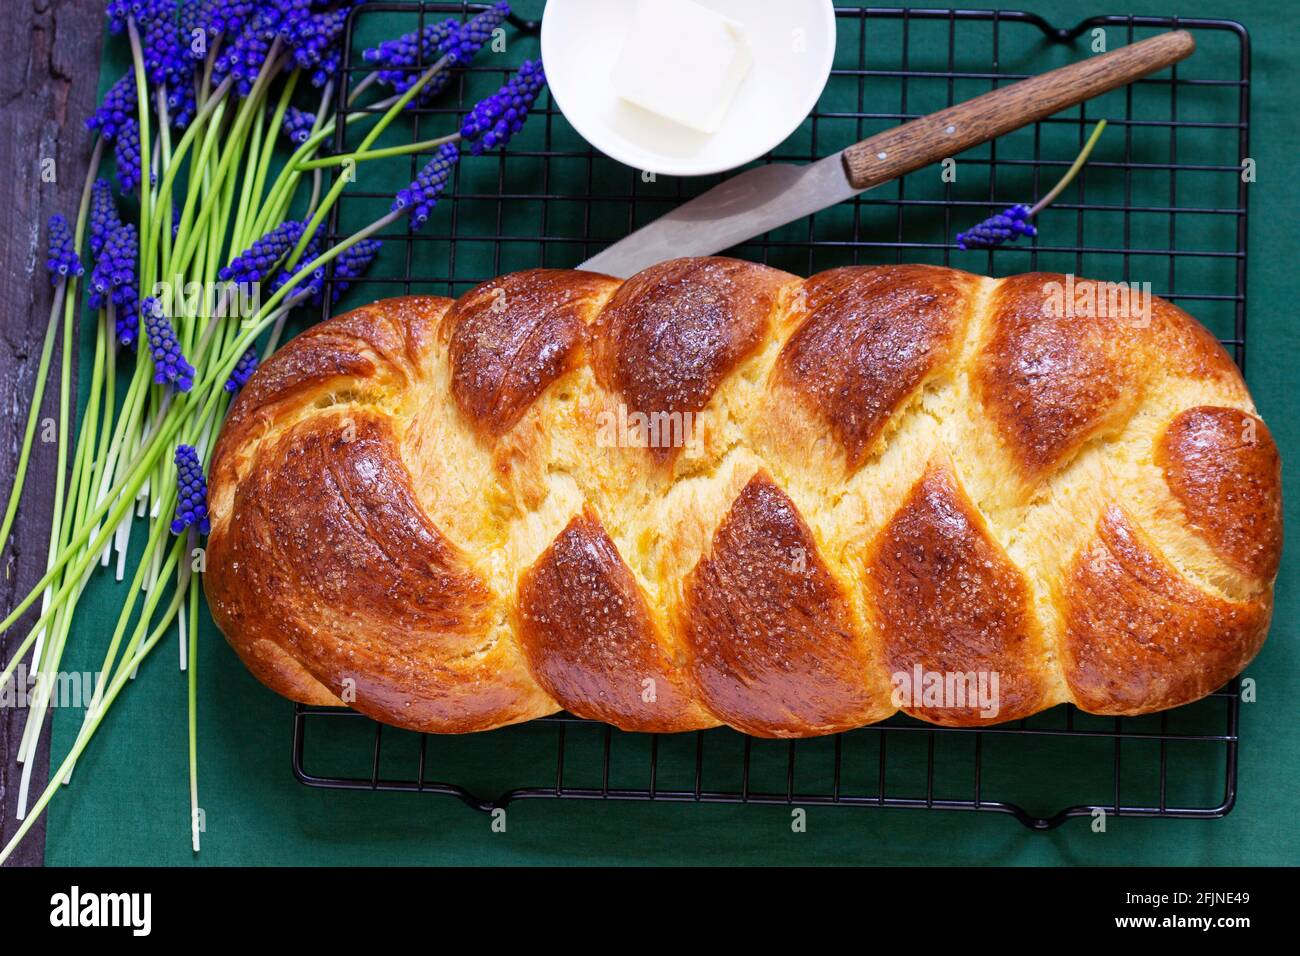 Challah made from yeast dough, a traditional festive dessert bread. Stock Photo